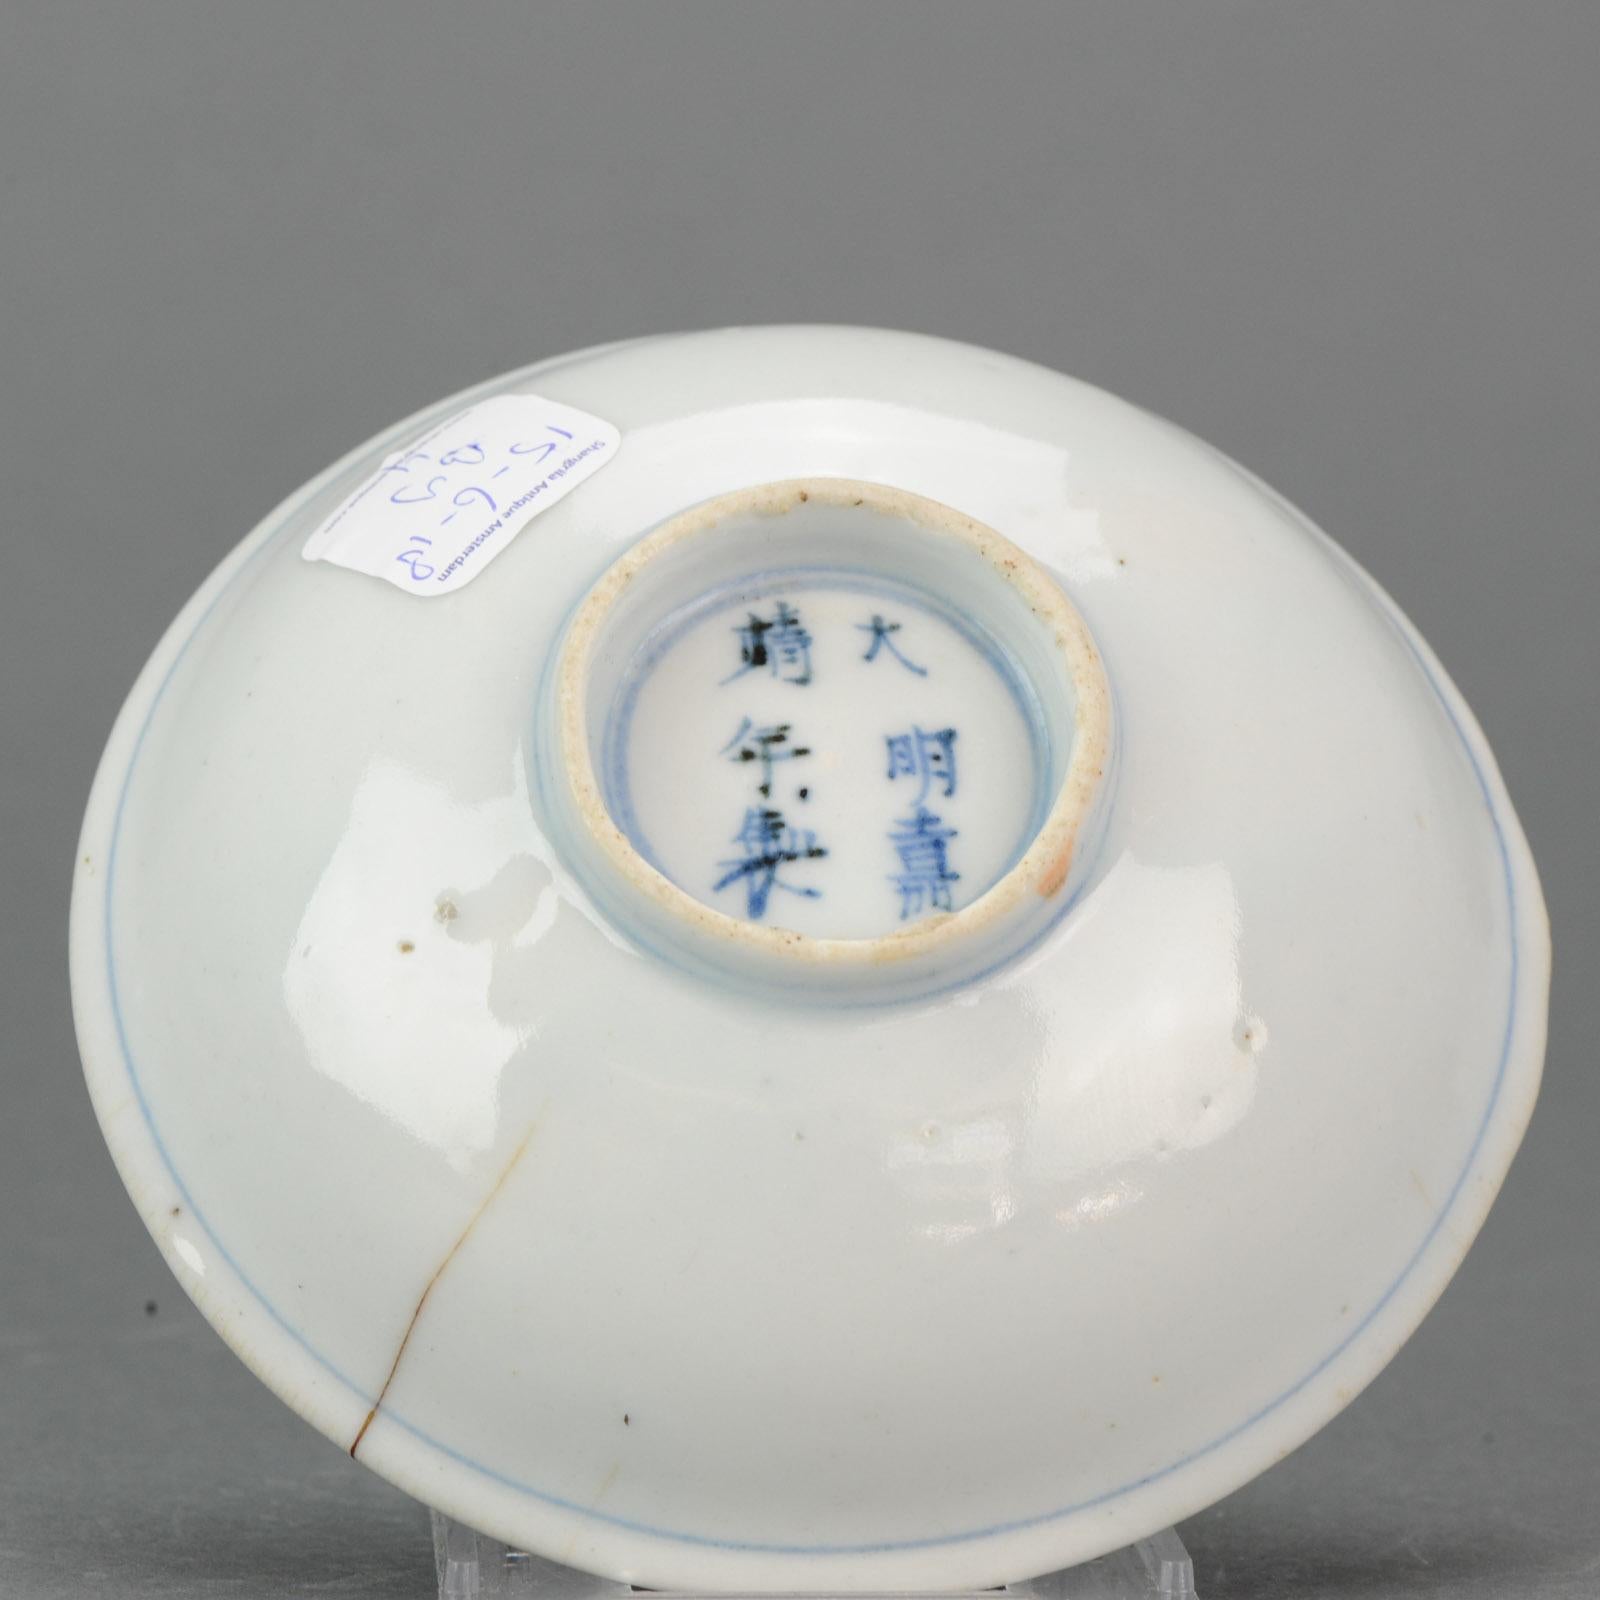 Antique Chinese 17th Century Porcelain Ming Jiajing Marked and Period Plate In Good Condition For Sale In Amsterdam, Noord Holland